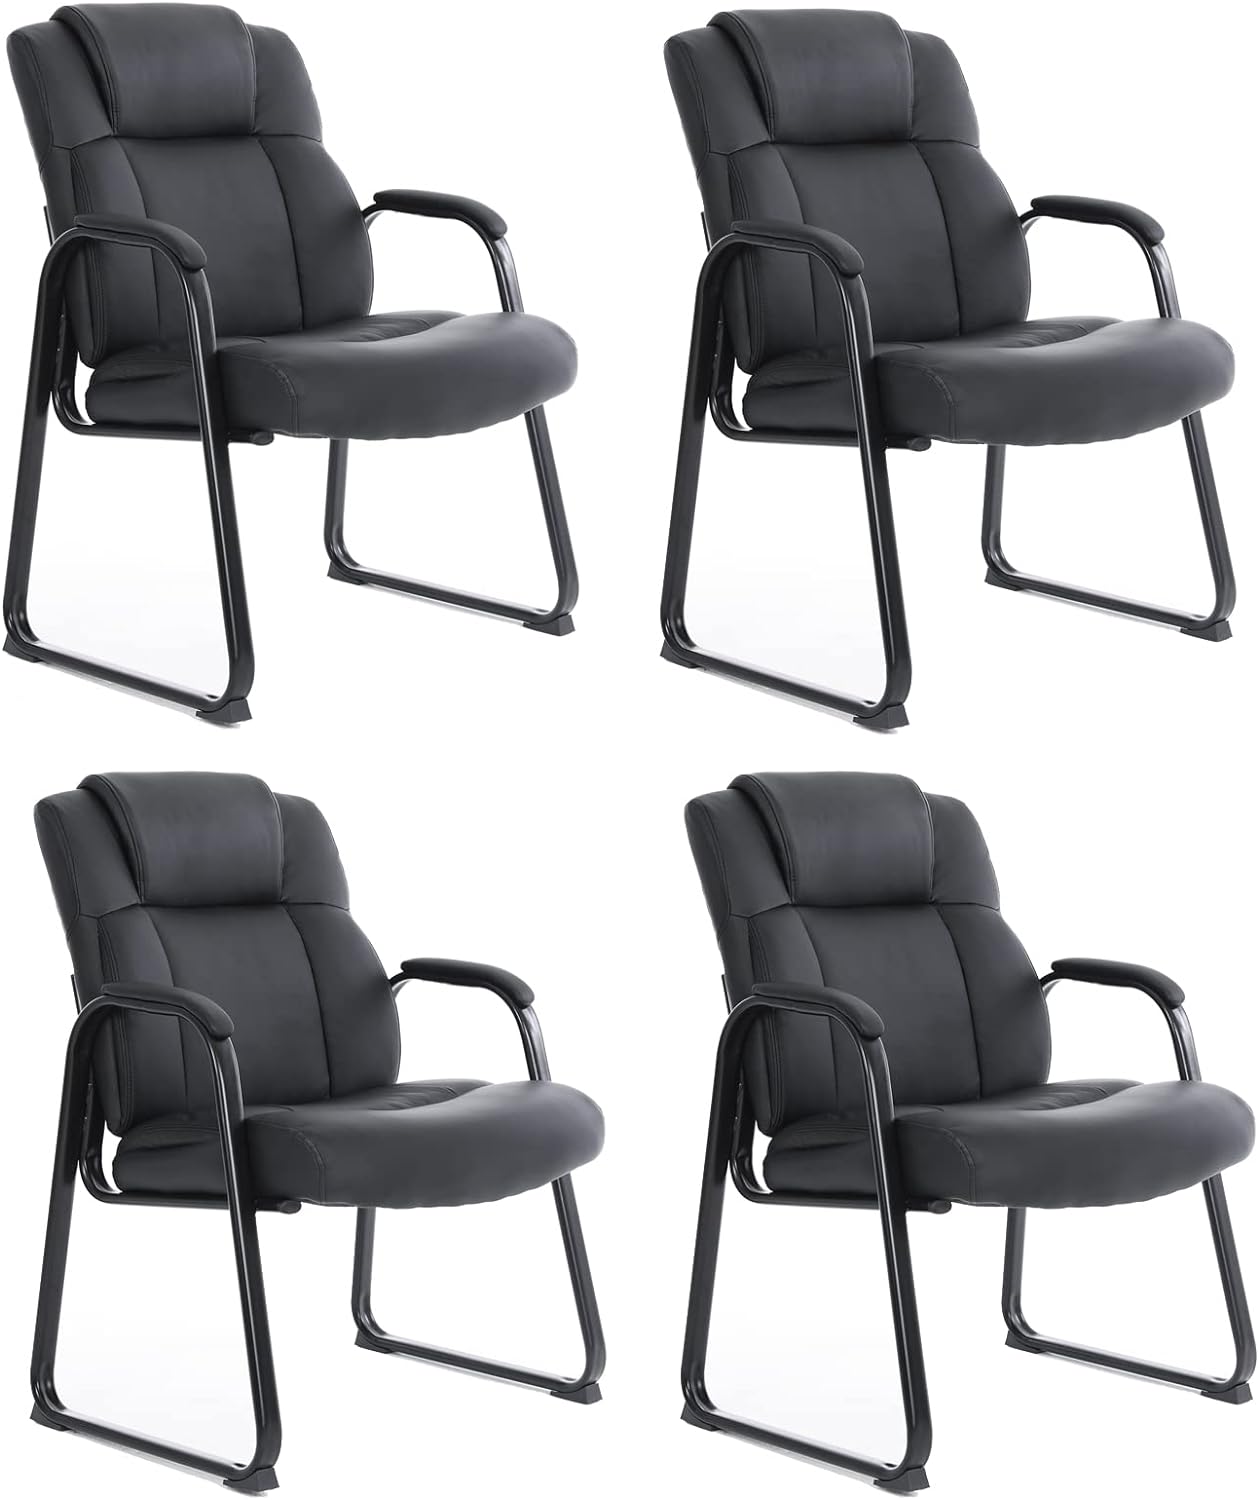 CLATINA Big & Tall 400 lb. Guest Chair, Leather Reception Chairs with Sled Base and Padded Arm Rest for Waiting Room Office Home and Meeting Conference-Black (4 Pack) - image 1 of 8